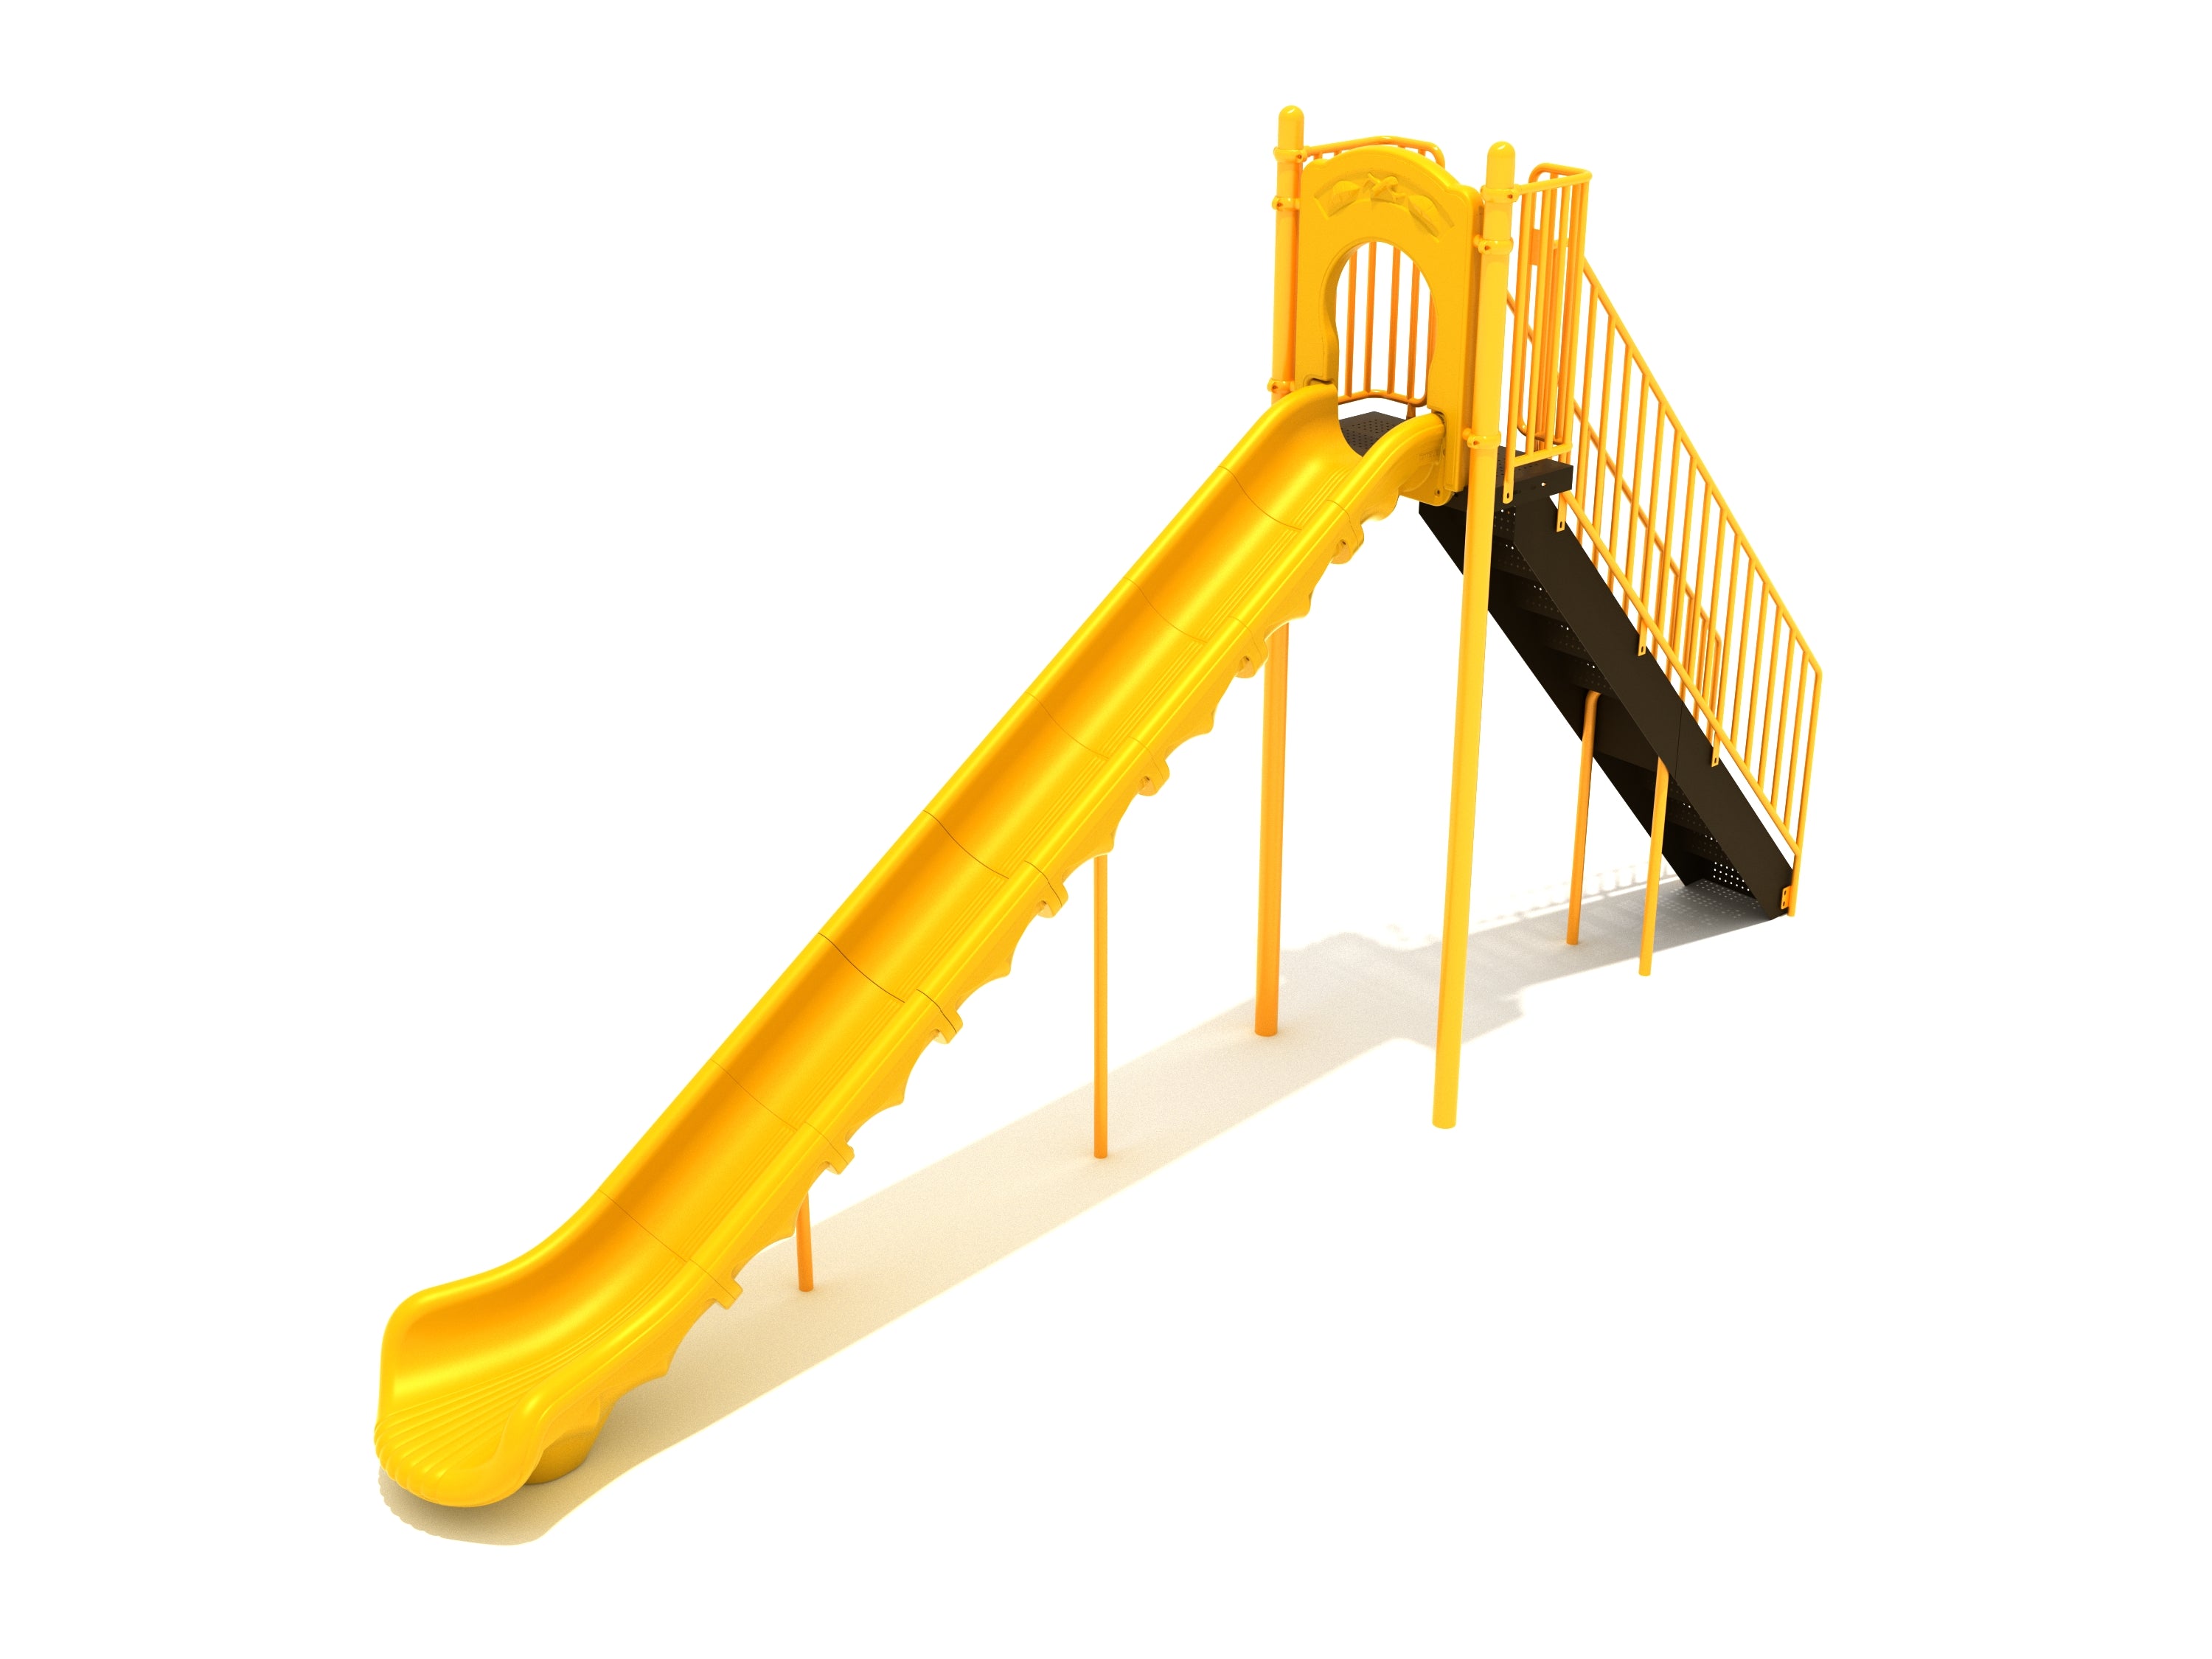 Sectional Straight Slide 8 Foot Deck